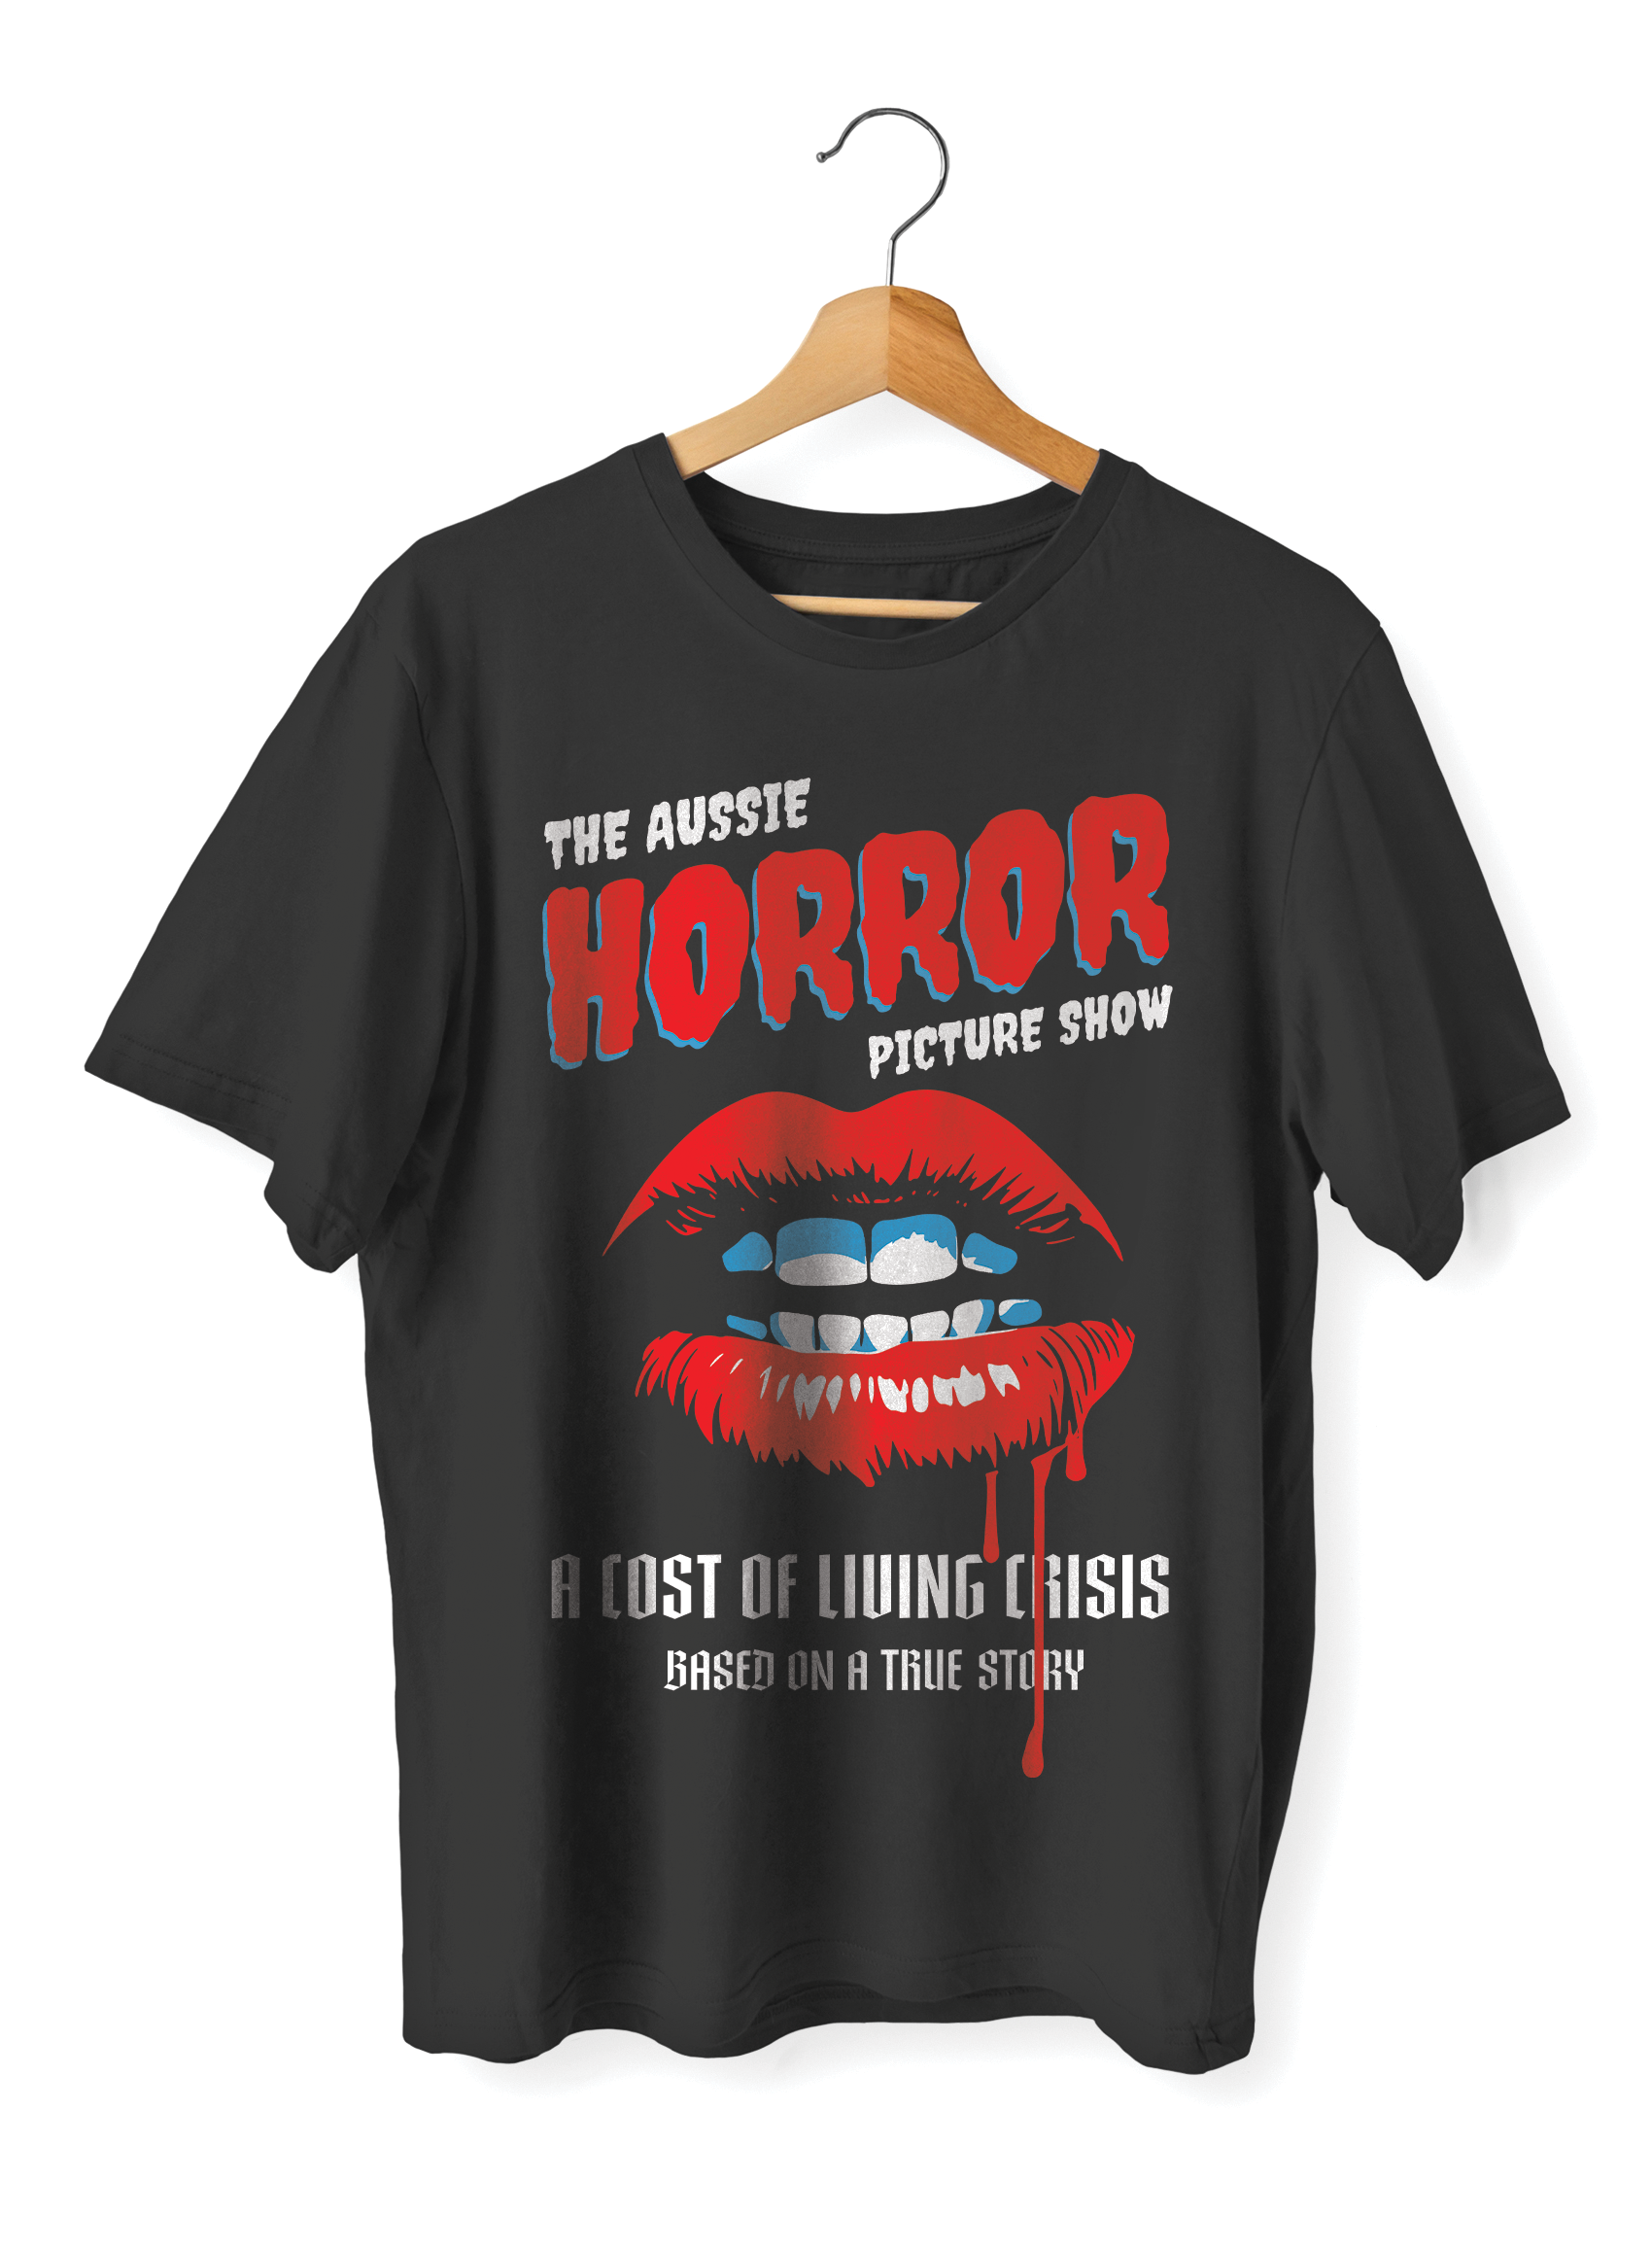 SWAG COST OF LIVING HORROR SHOW T-SHIRT - AUSSIE HORROR PICTURE SHOW